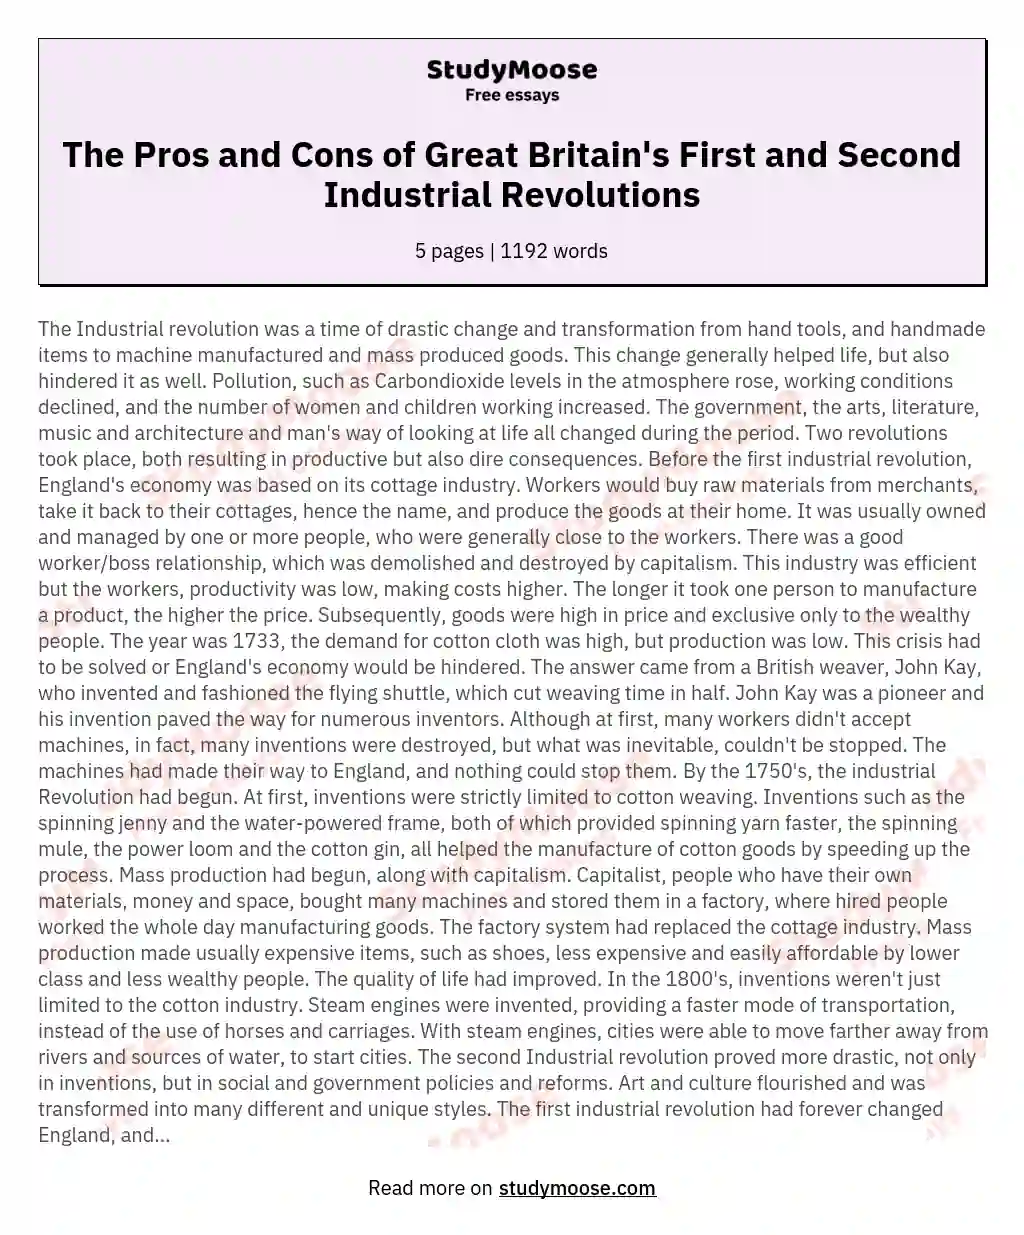 The Pros and Cons of Great Britain's First and Second Industrial Revolutions essay